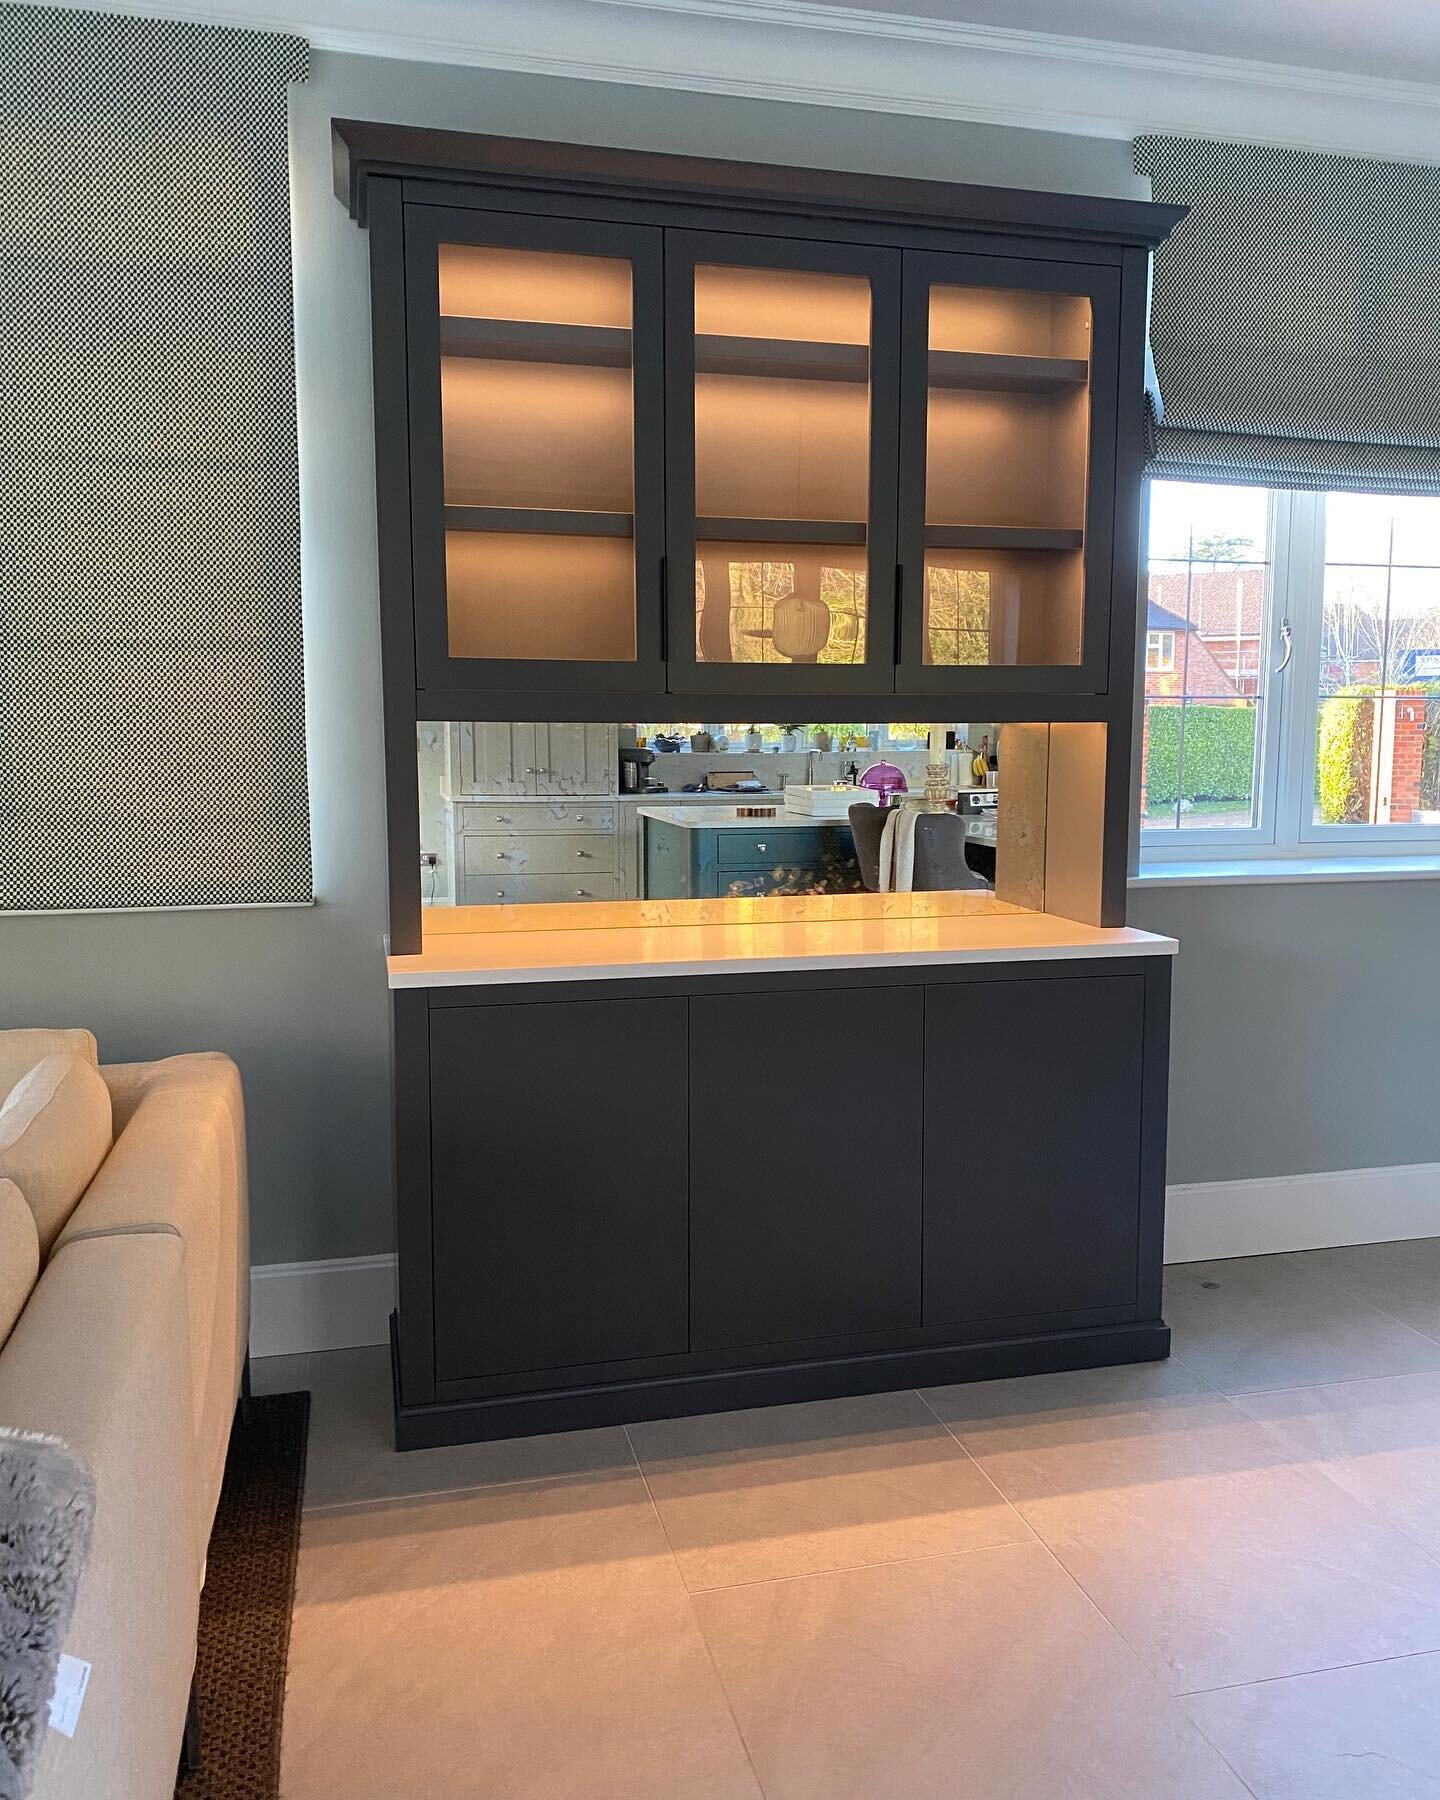 We have recently had an influx of enquiries about drinks cabinets and home bars. Here is one of our recent installations. A home drinks cabinet with glass doors, mirrored back panel and quartz countertop. 🍸
.
.
.
#homebar #bespokedrinkscabinet #home